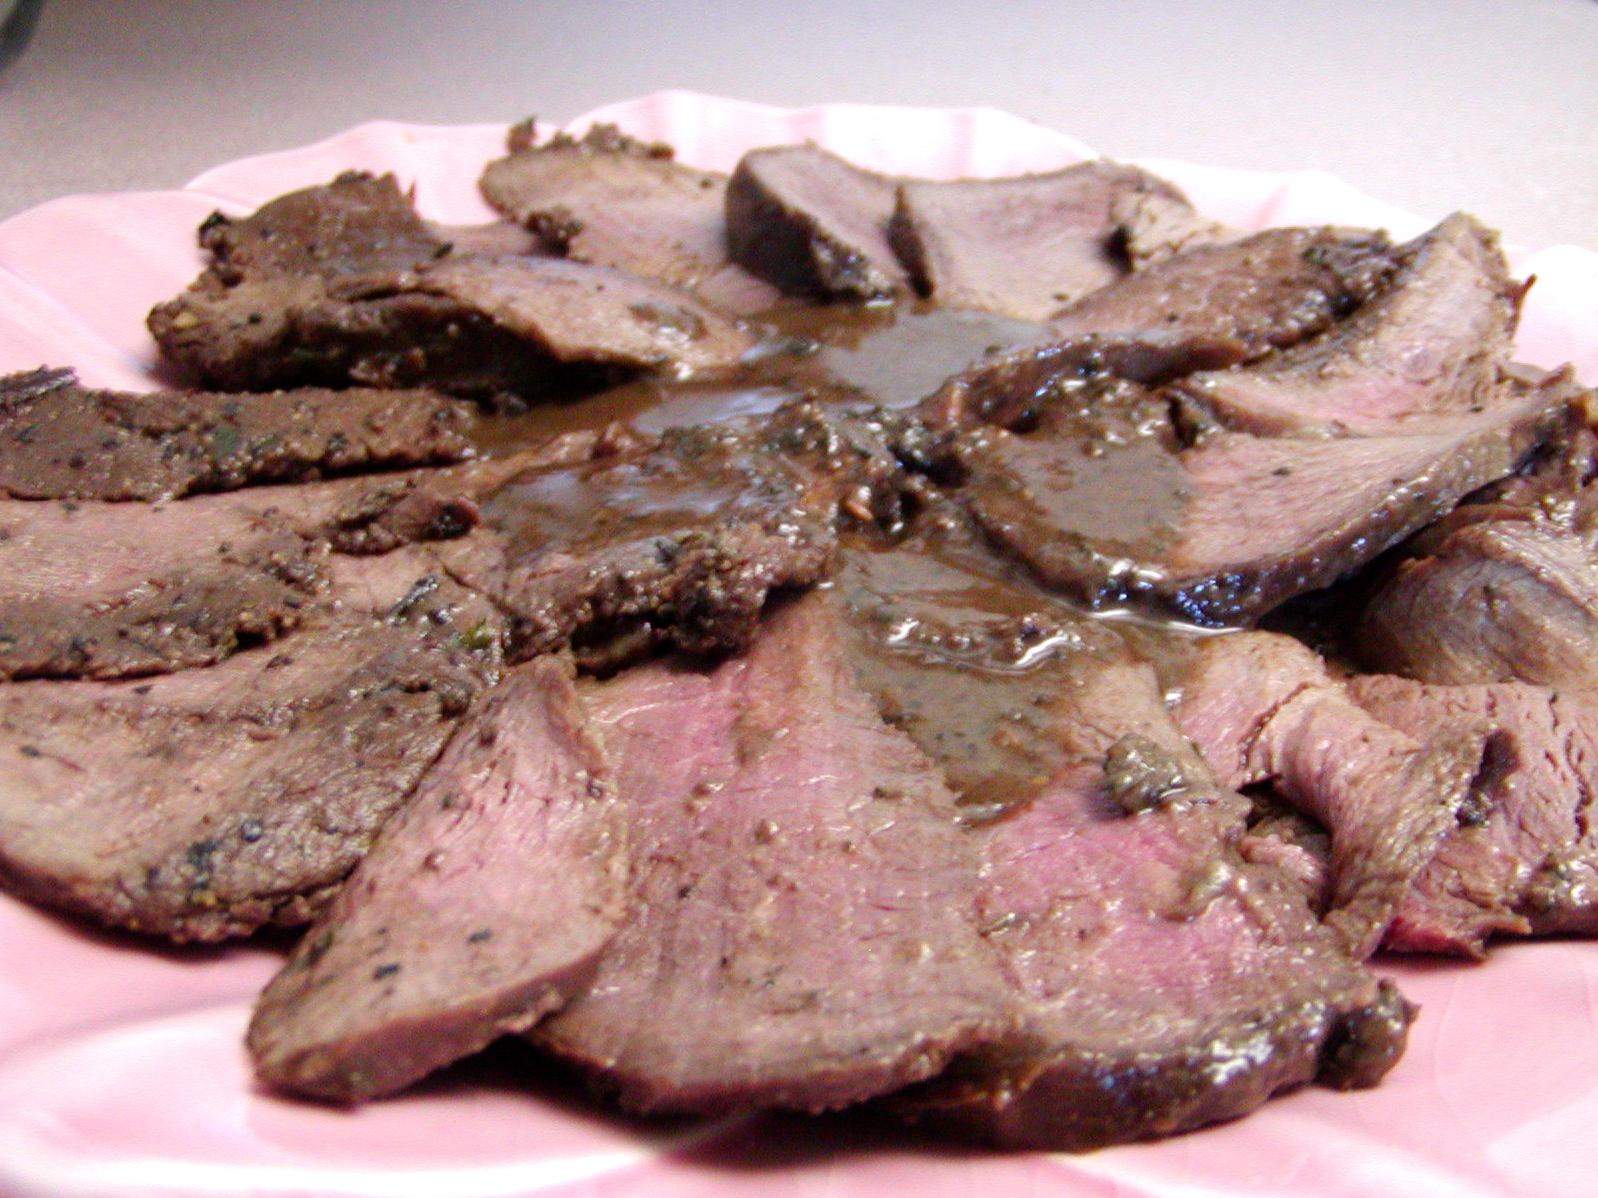  The juicy and tender venison tenderloin in its full glory!